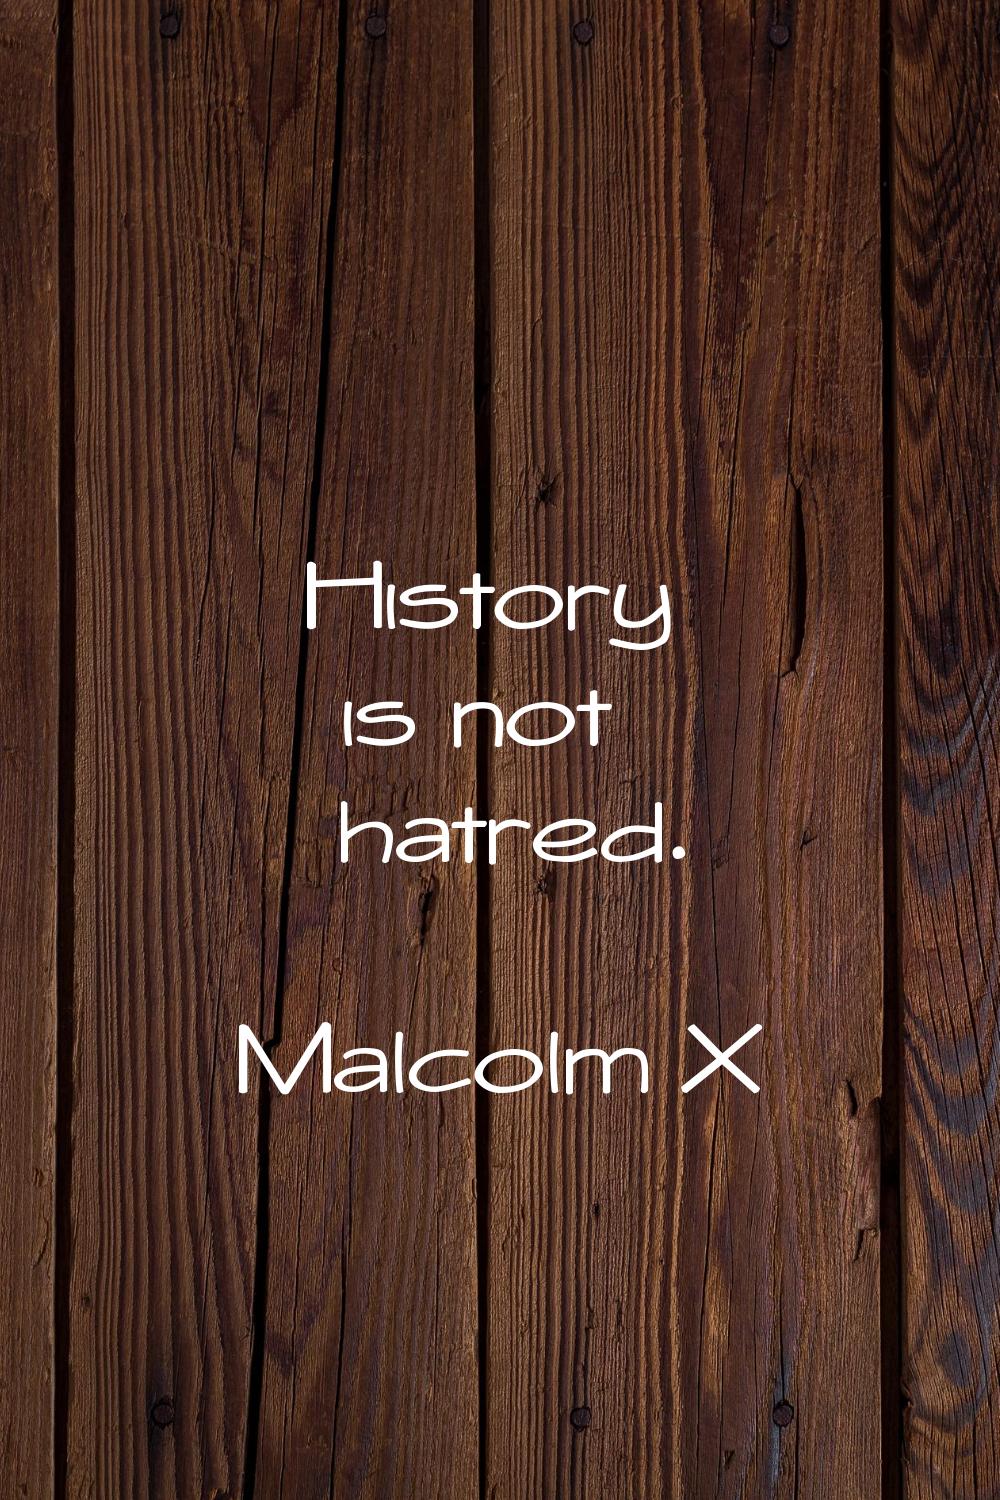 History is not hatred.